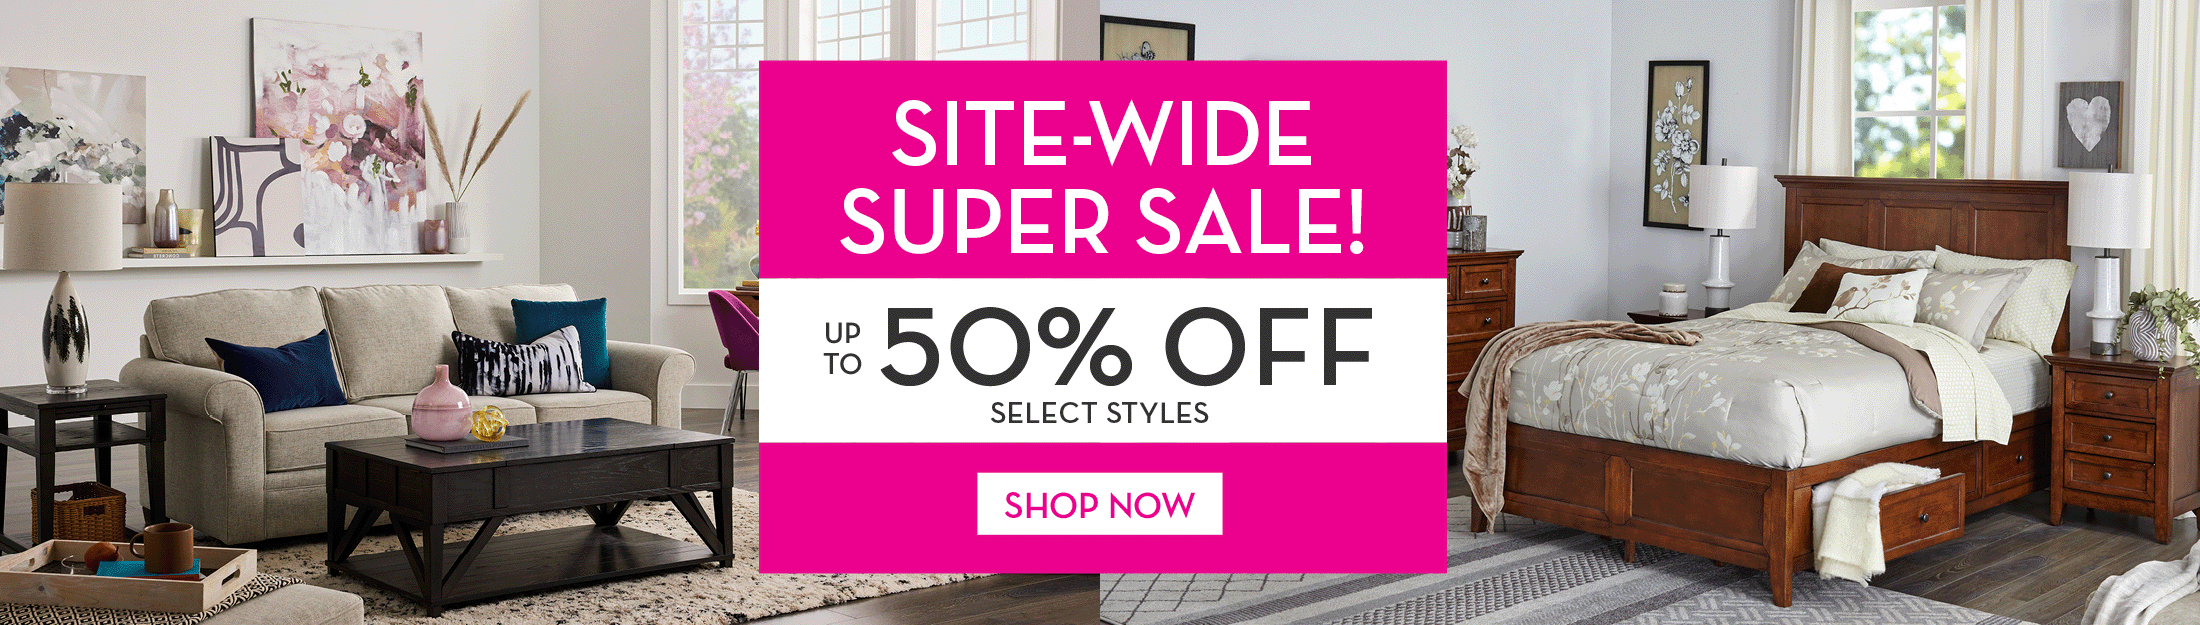 Site-wide Super Sale - up to 50% off!